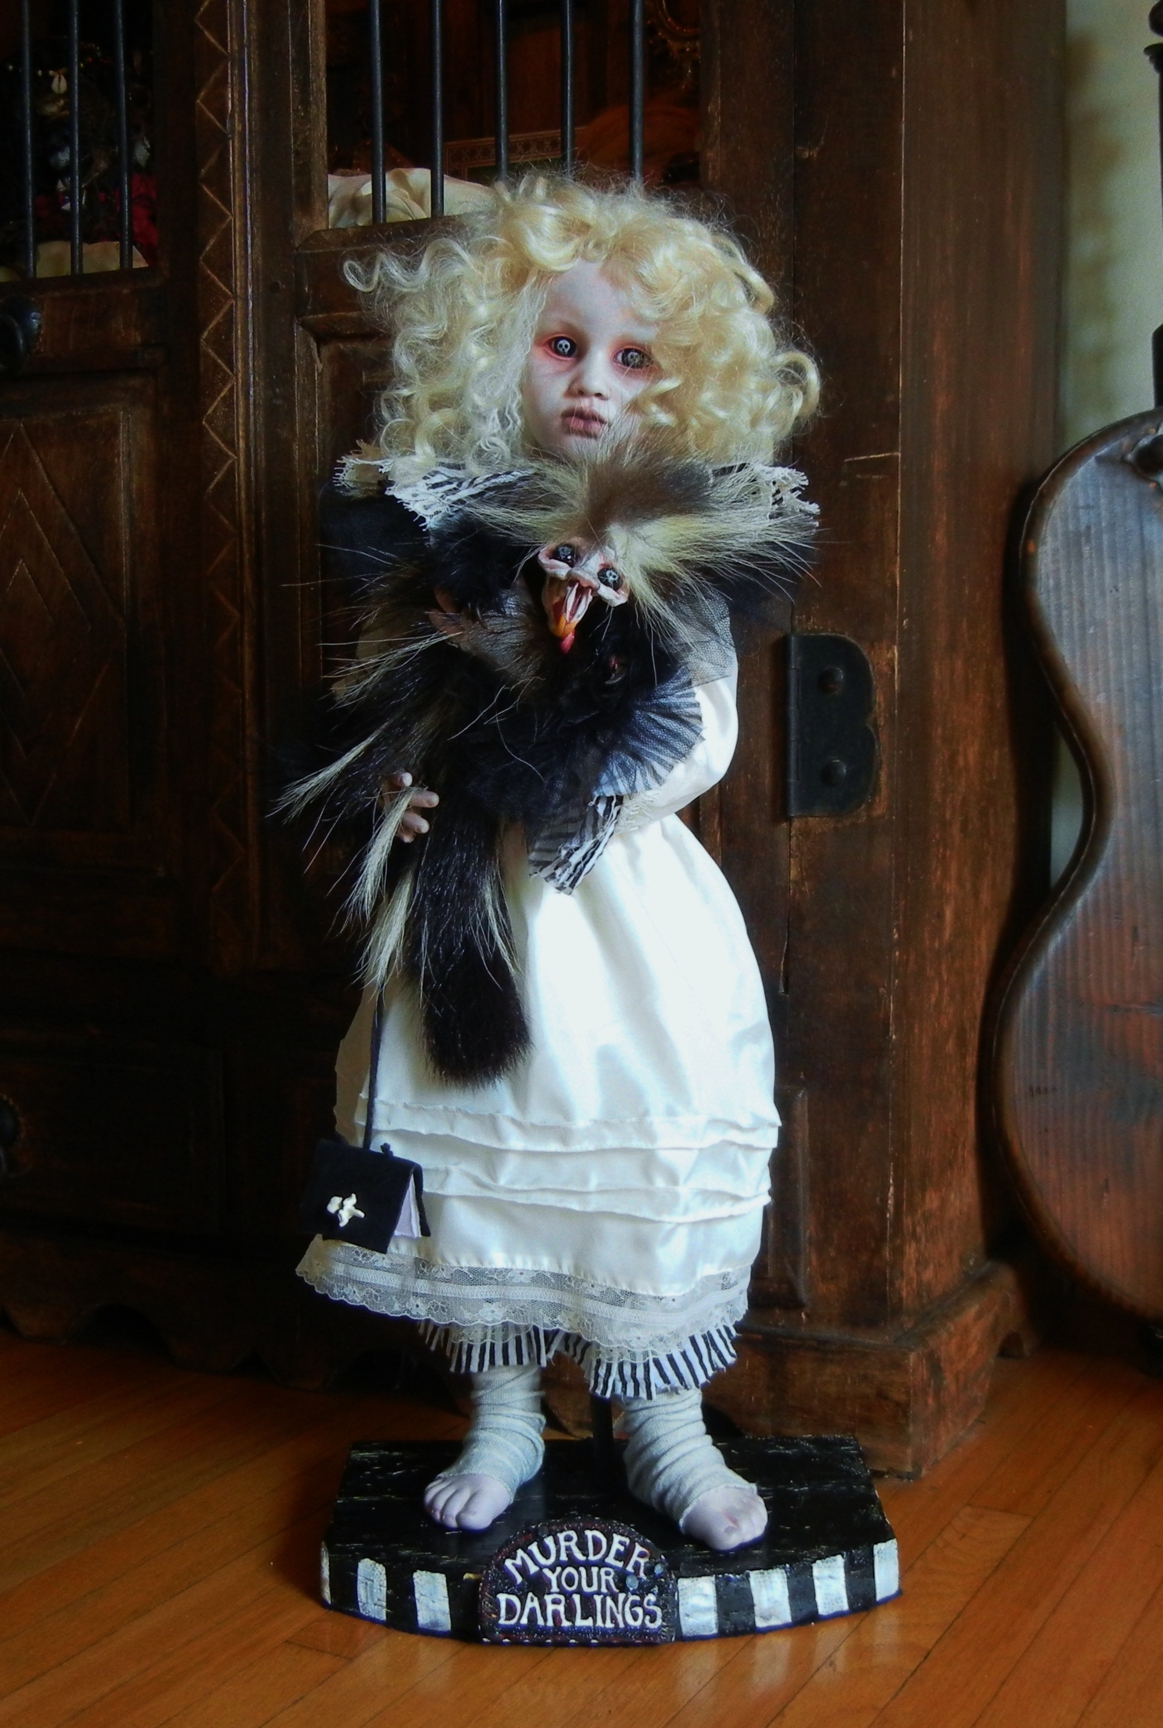 pale gothic artdoll with blond ringlets, skulls in her black eyes, wearing a white dress, carrying black feathered creature sculpture and standing on a painted wooden platform